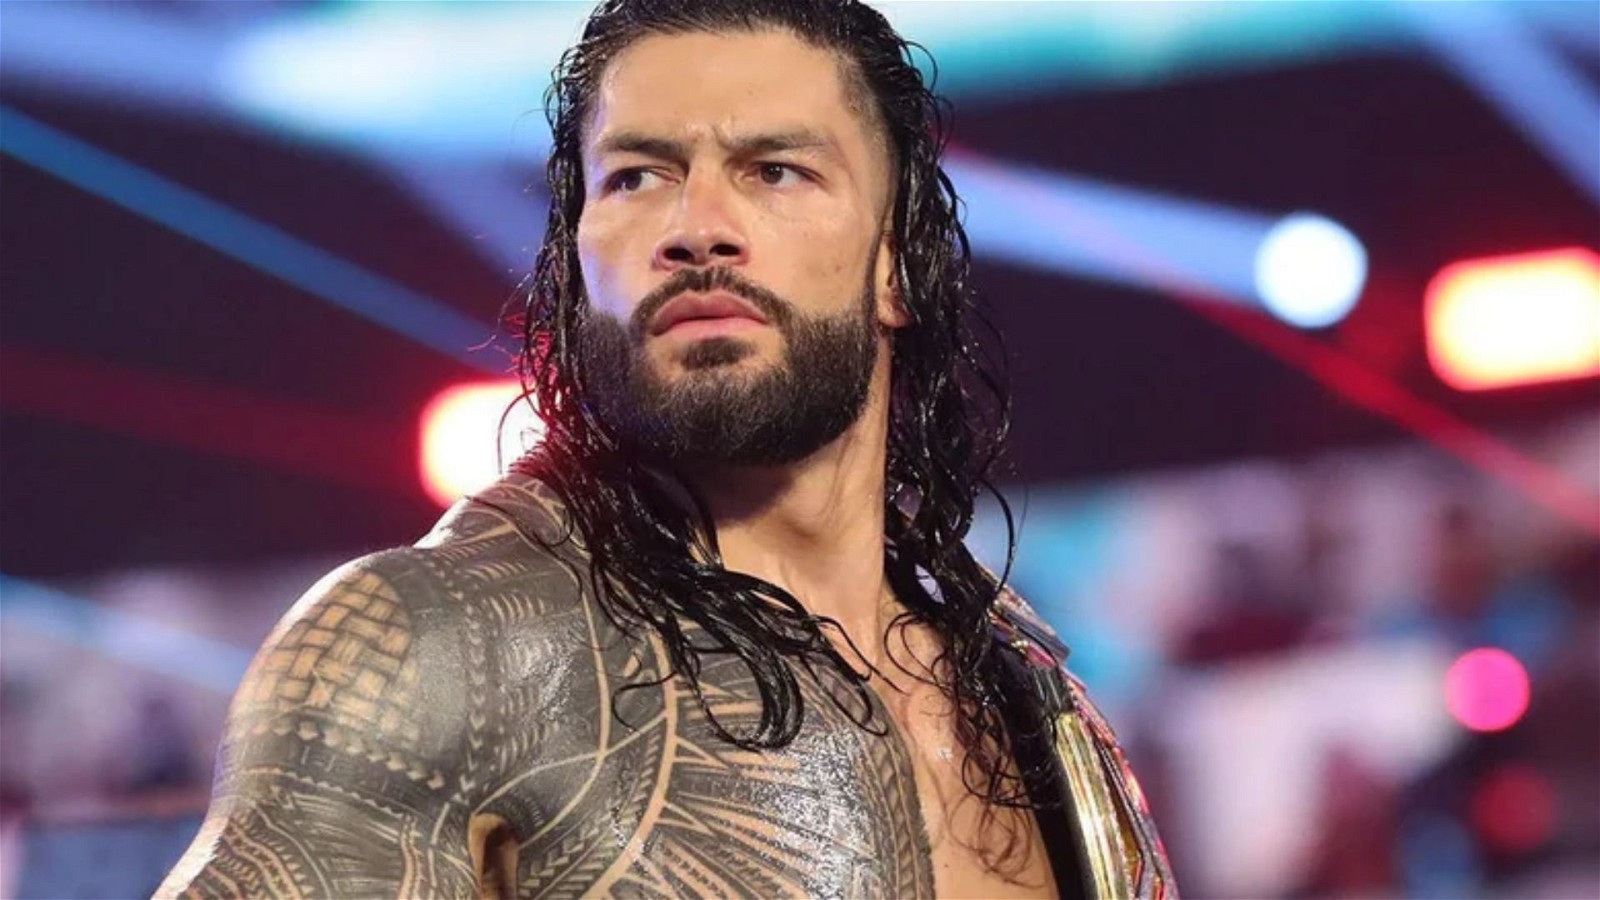 Roman Reigns' recent loss ended his title reign as WWE champion